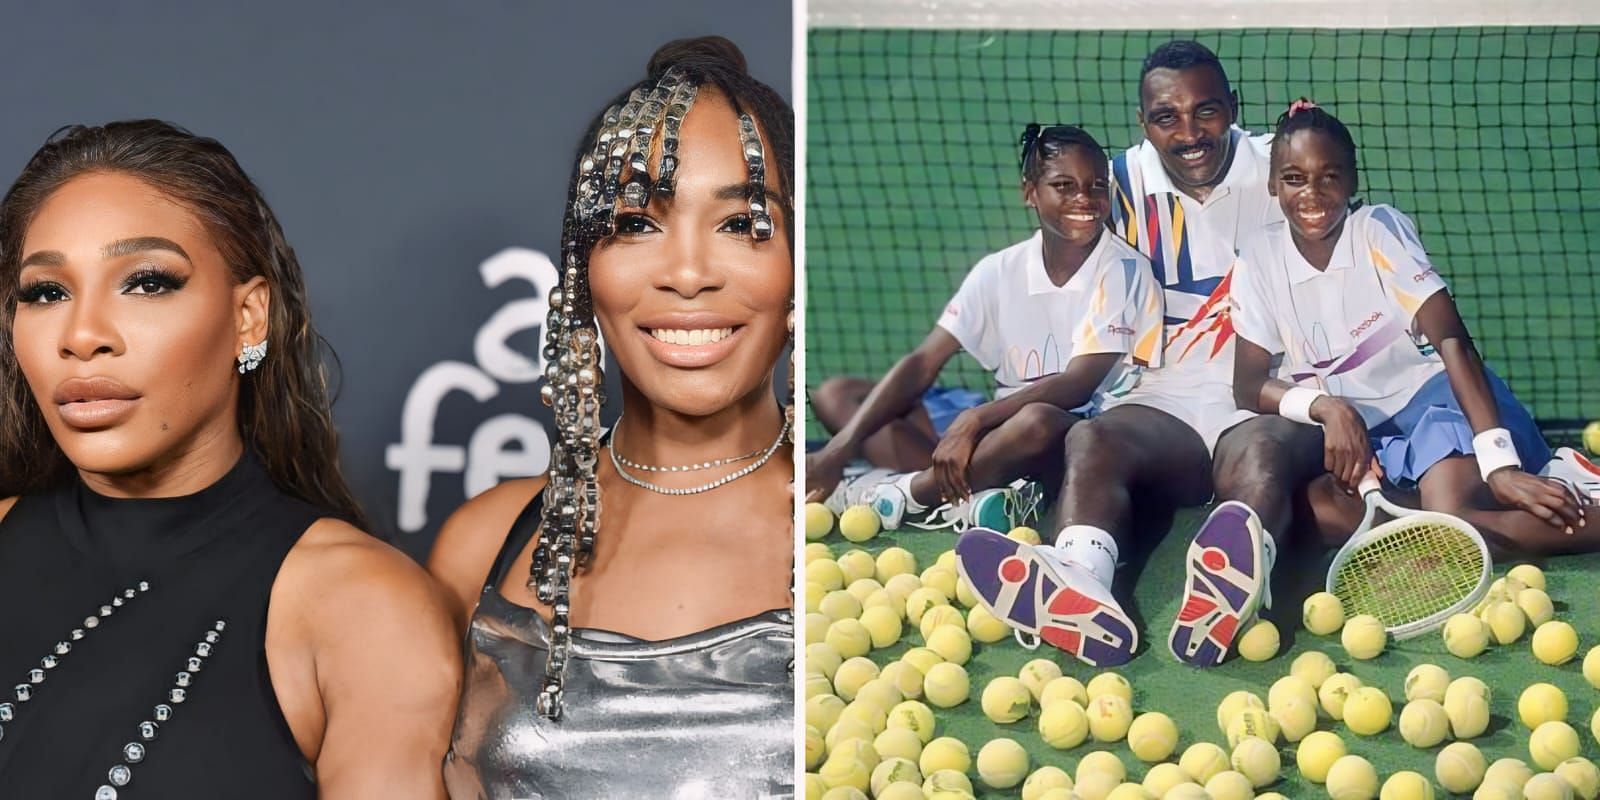 Venus & Serena Williams' ex-coach Rick Macci reveals what their father Richard used to think about who among them would be better